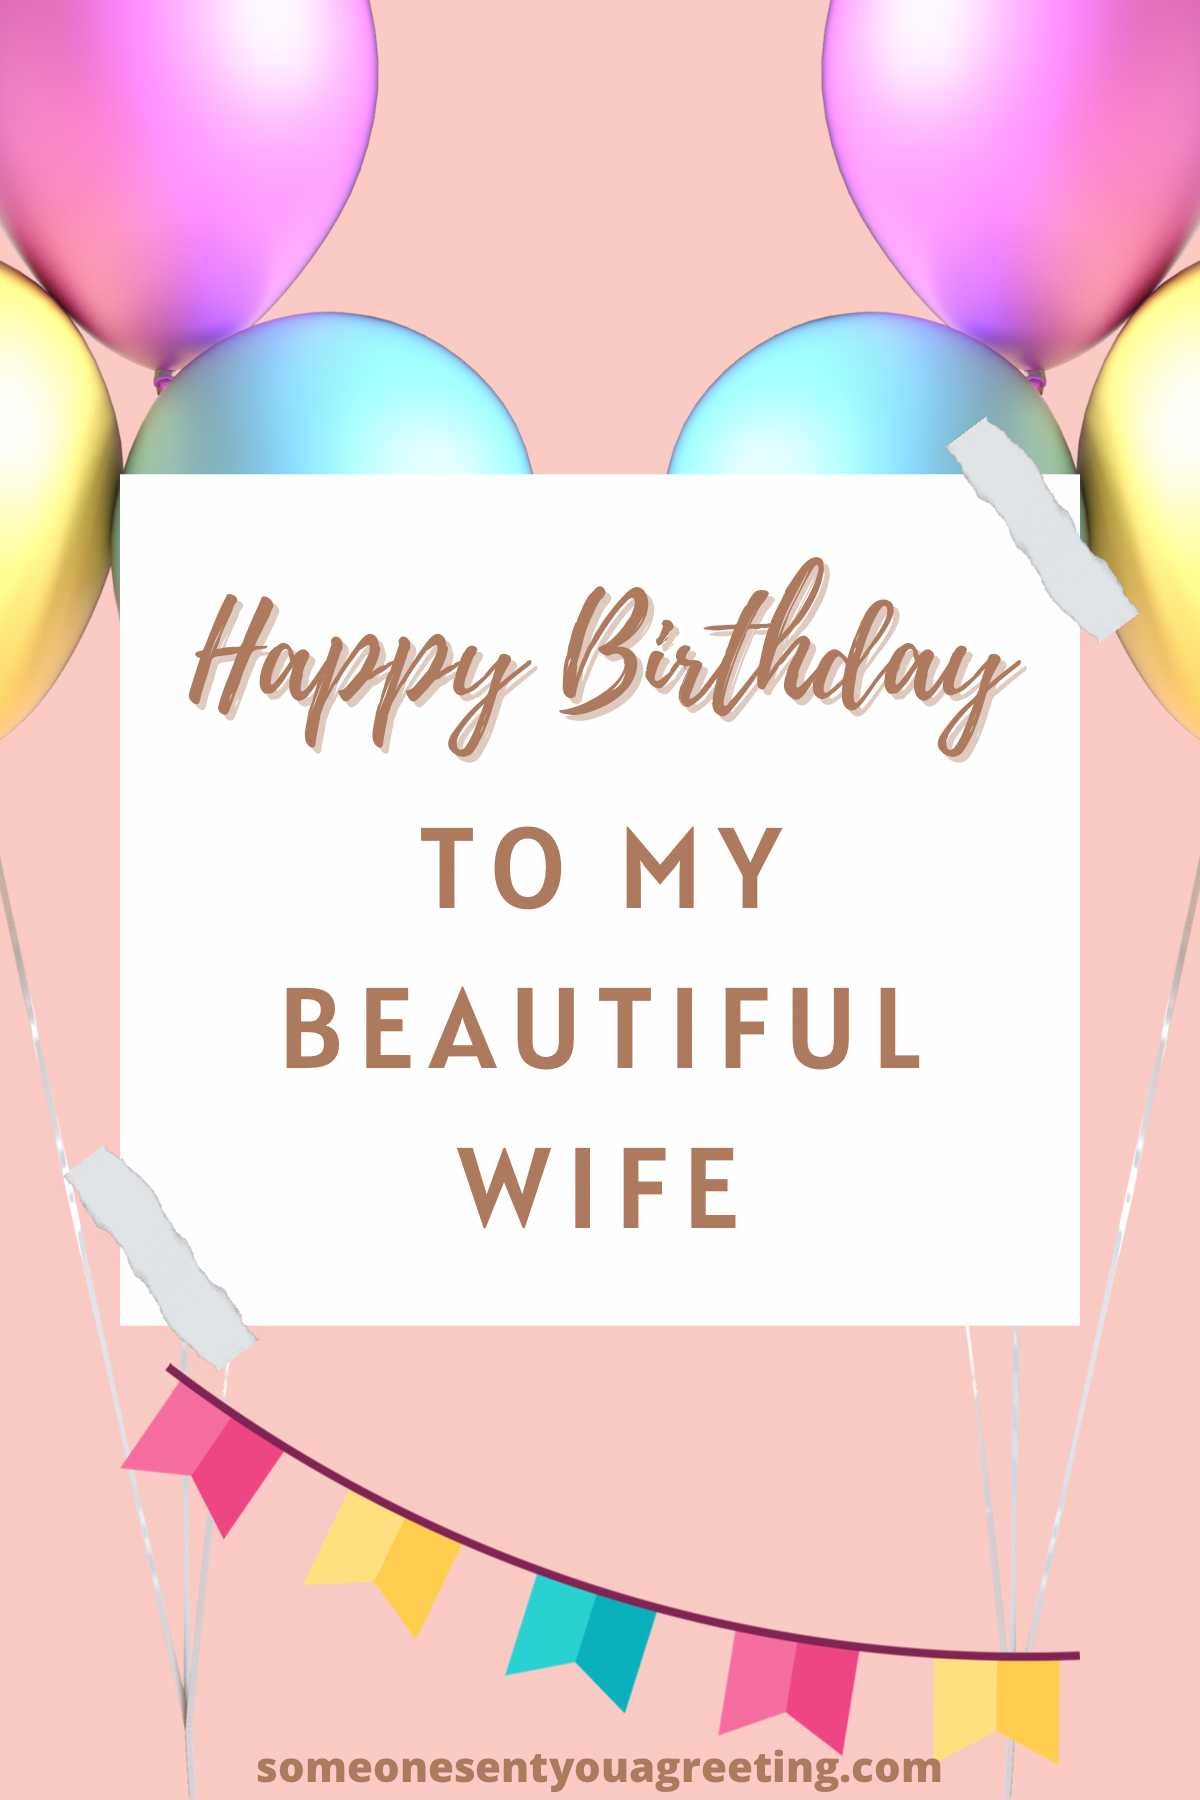 wife's birthday message